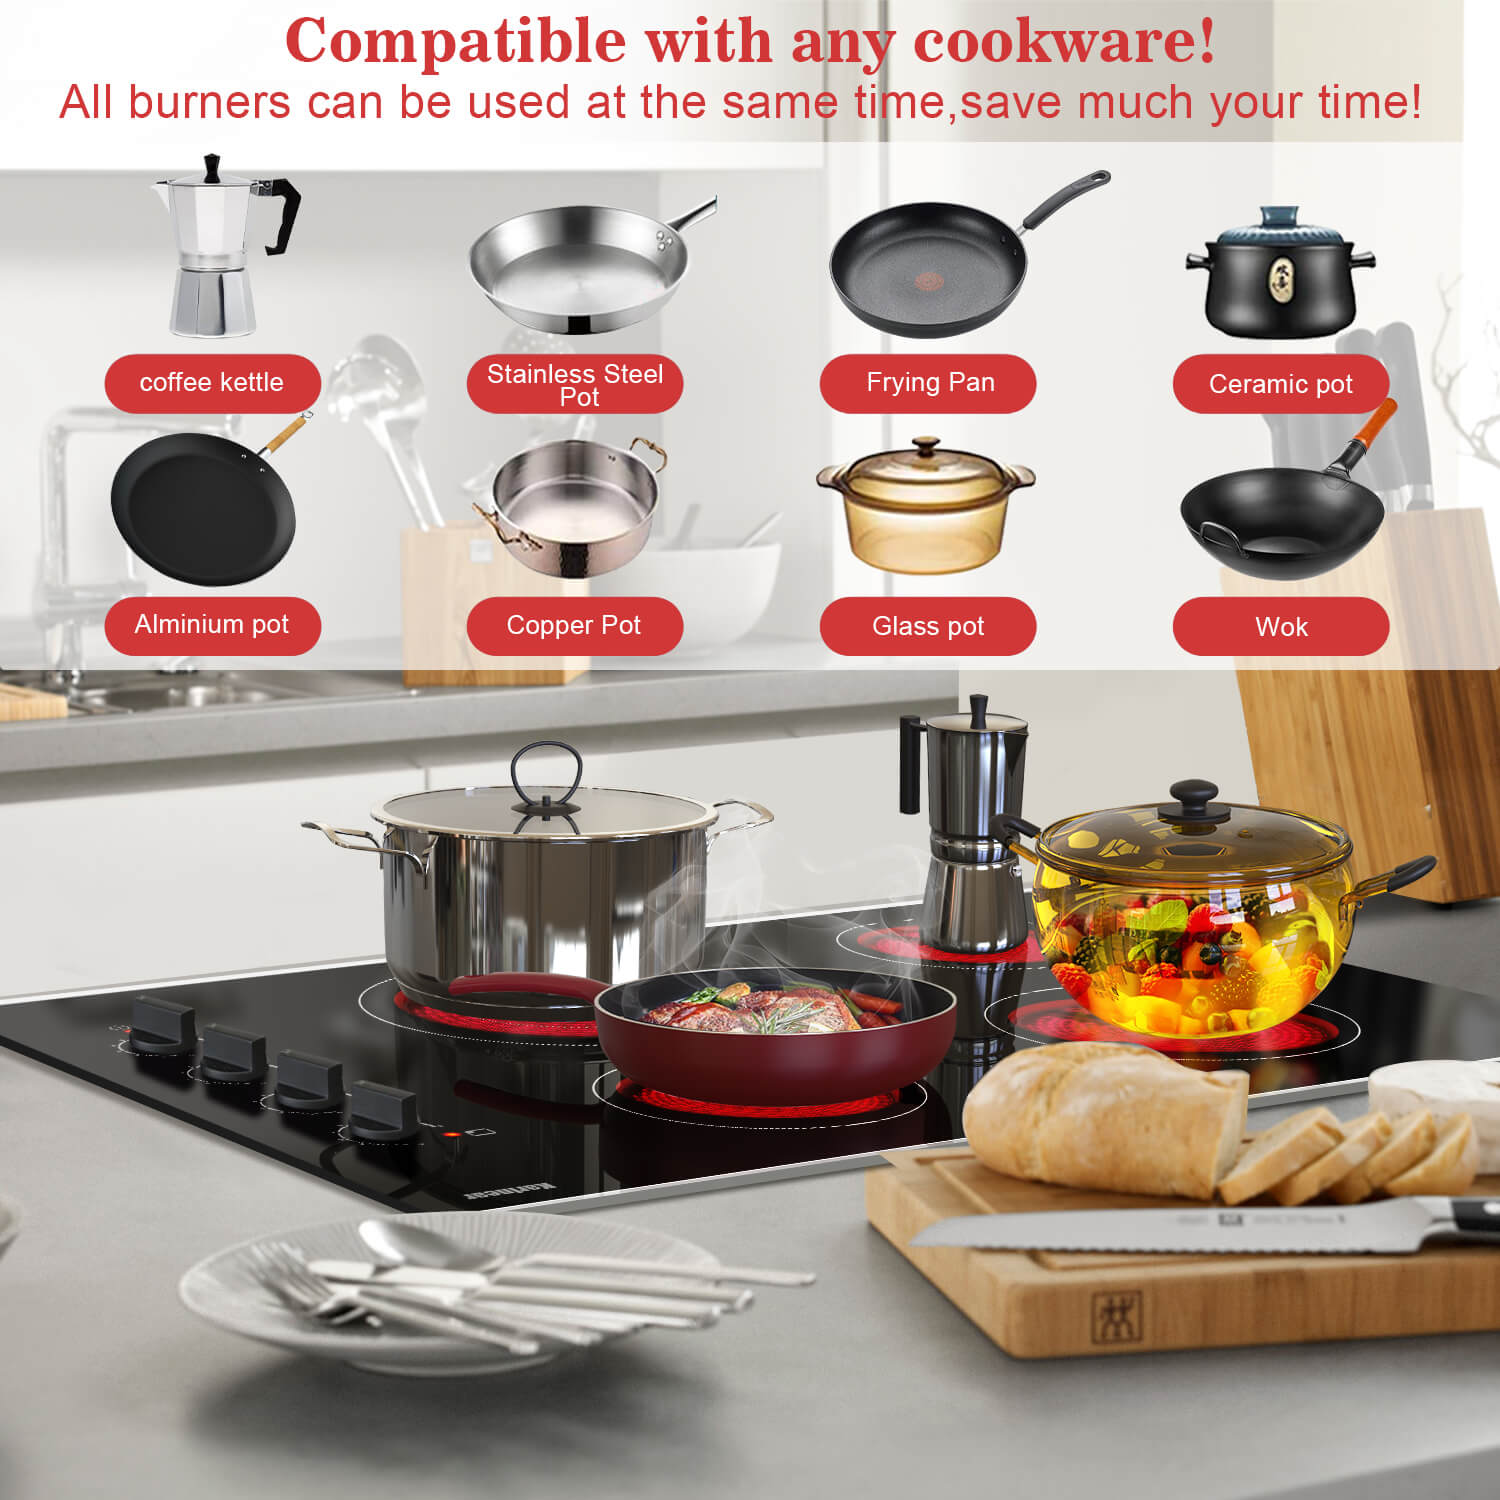 he built in ceramic hob can be used with any type of cookware, such as aluminium pans, copper pans, cast iron frying pans and non-magnetic stainless steel pans can heats cookware efficiently with minimal heat loss. Glass cooktop electric is easy to clean, simply wipe with a clean cloth when cool.